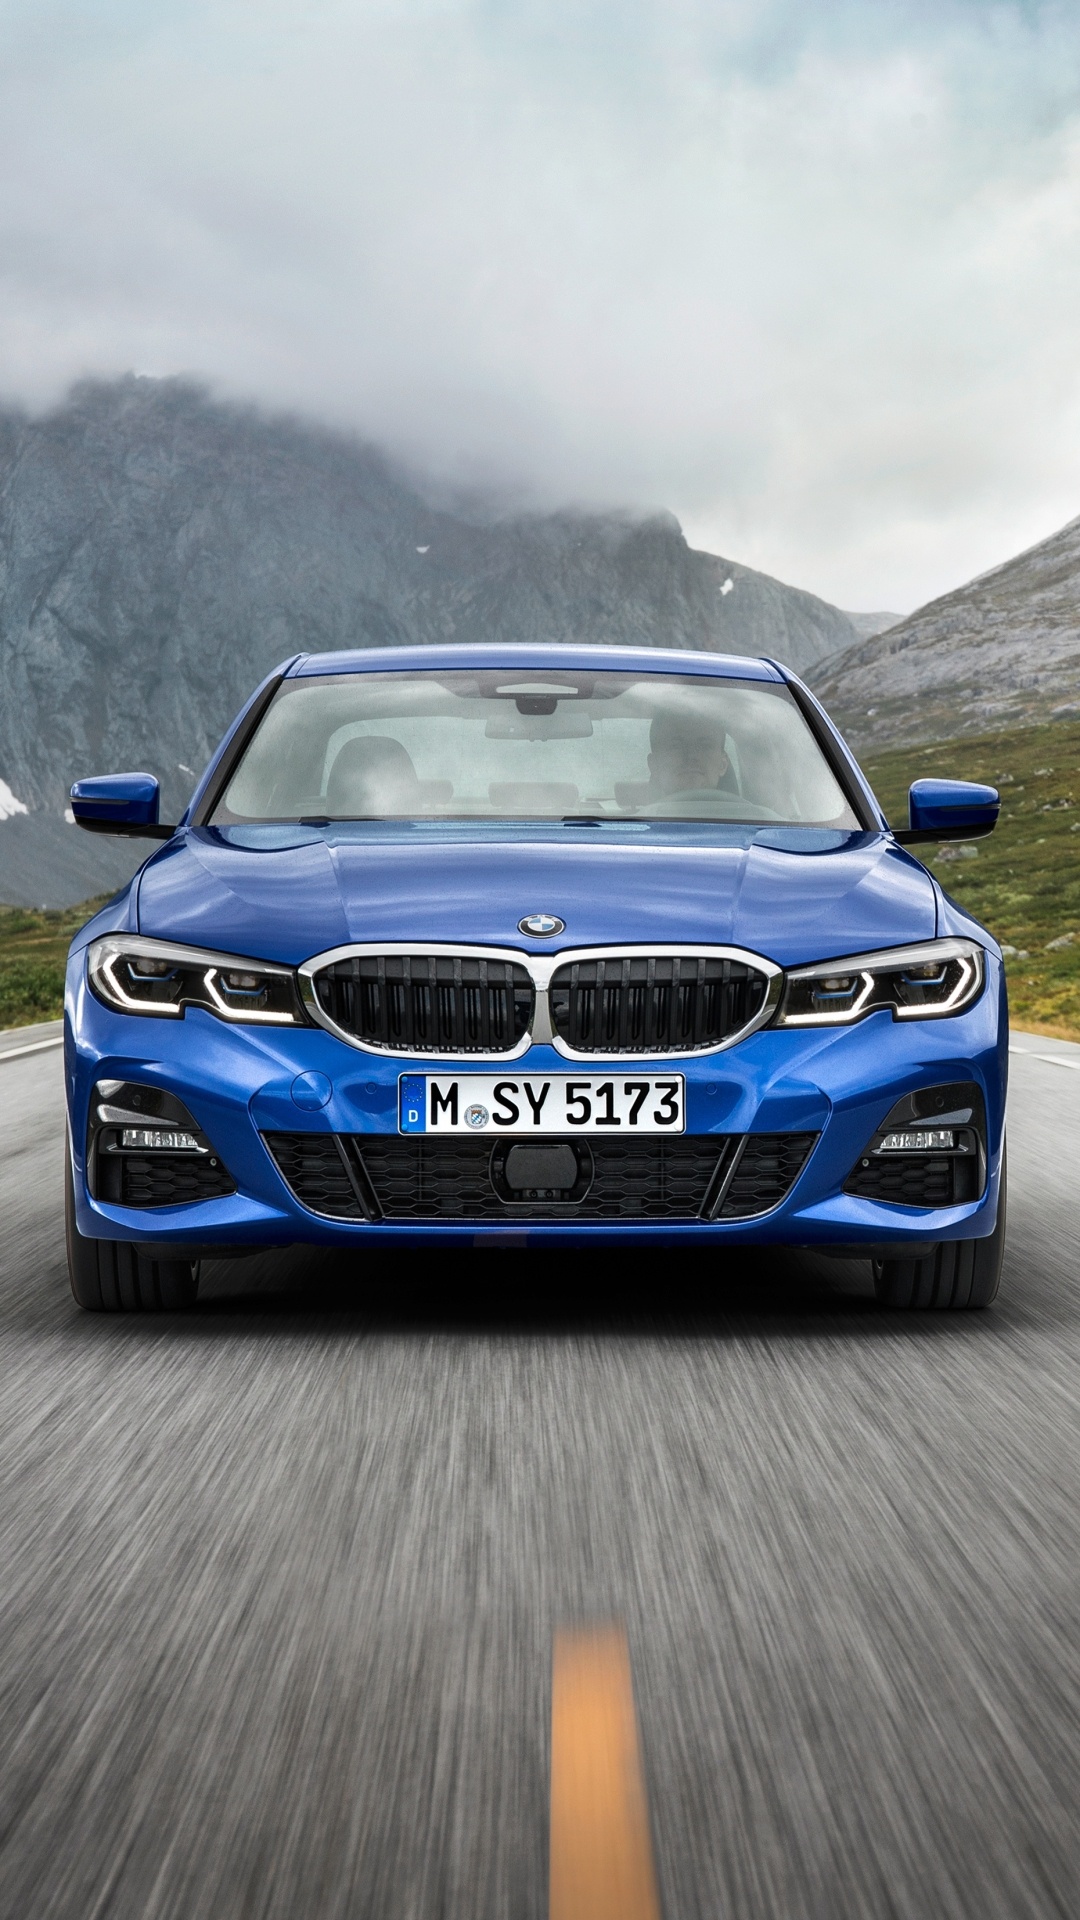 BMW 3 Series, Premium vehicles, Unmatched performance, Symbol of automotive excellence, 1080x1920 Full HD Handy